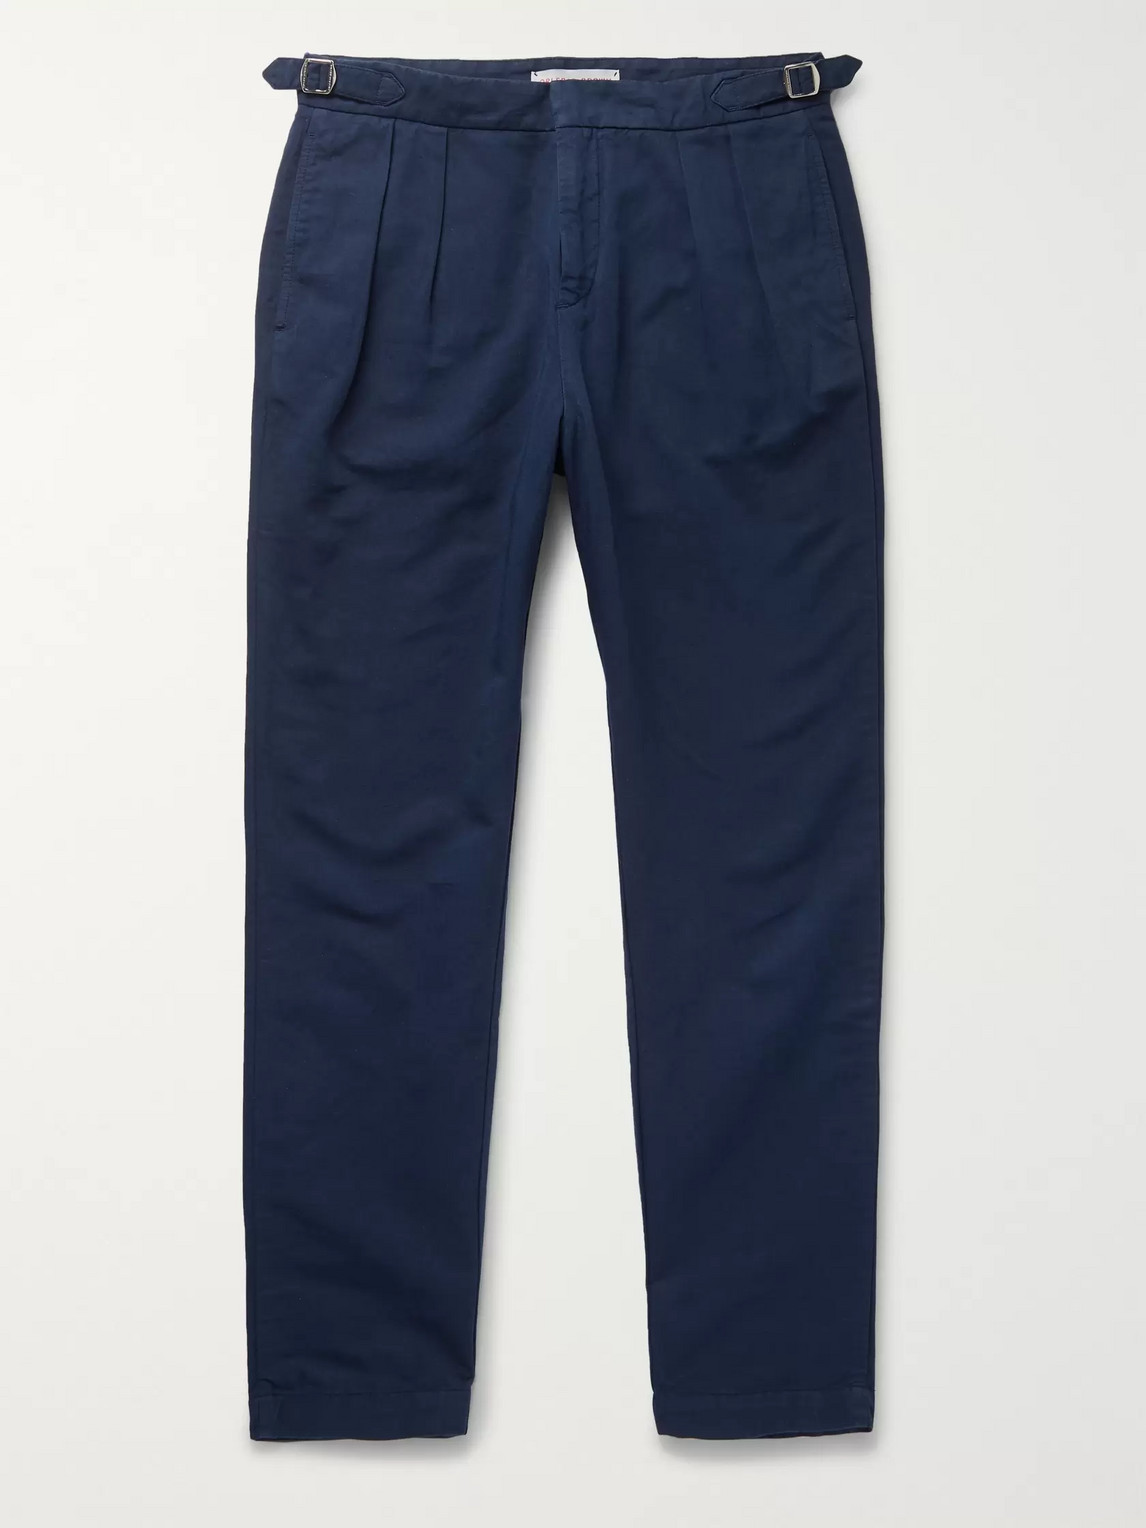 ORLEBAR BROWN NAVY CALDWELL TAPERED PLEATED COTTON AND LINEN-BLEND TROUSERS